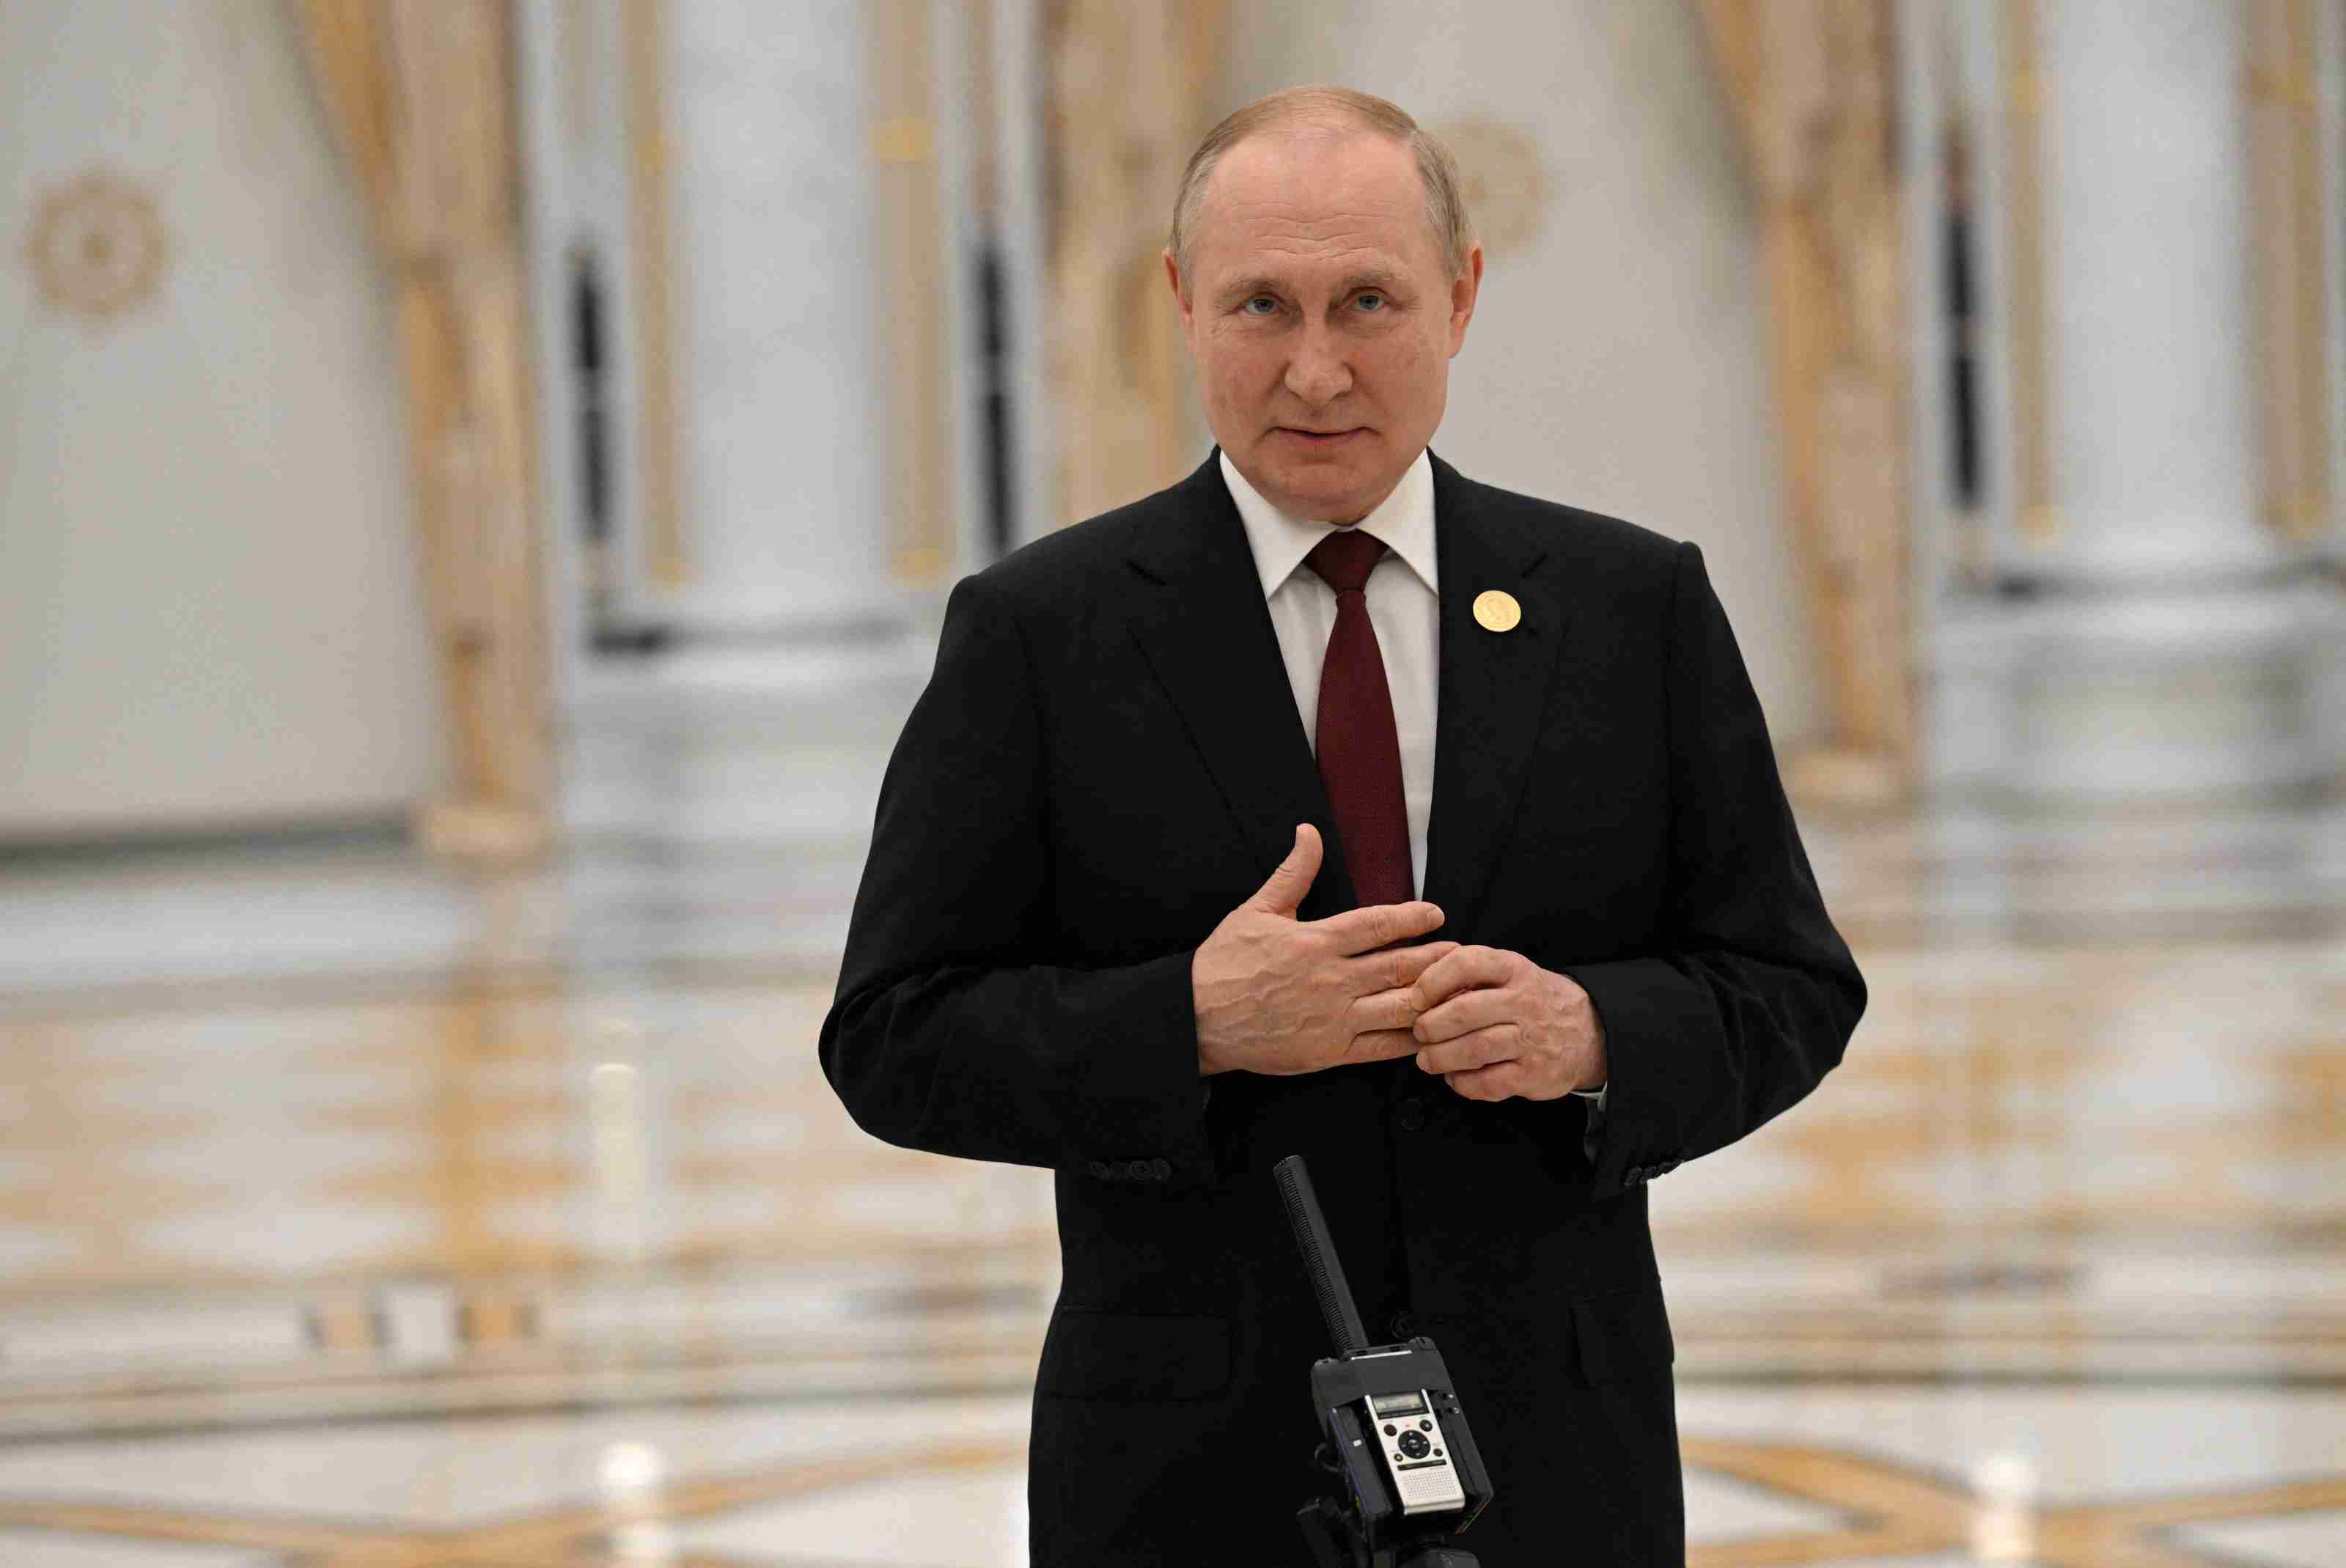 It would be ‘disgusting’ to see Boris Johnson ‘naked’: Putin